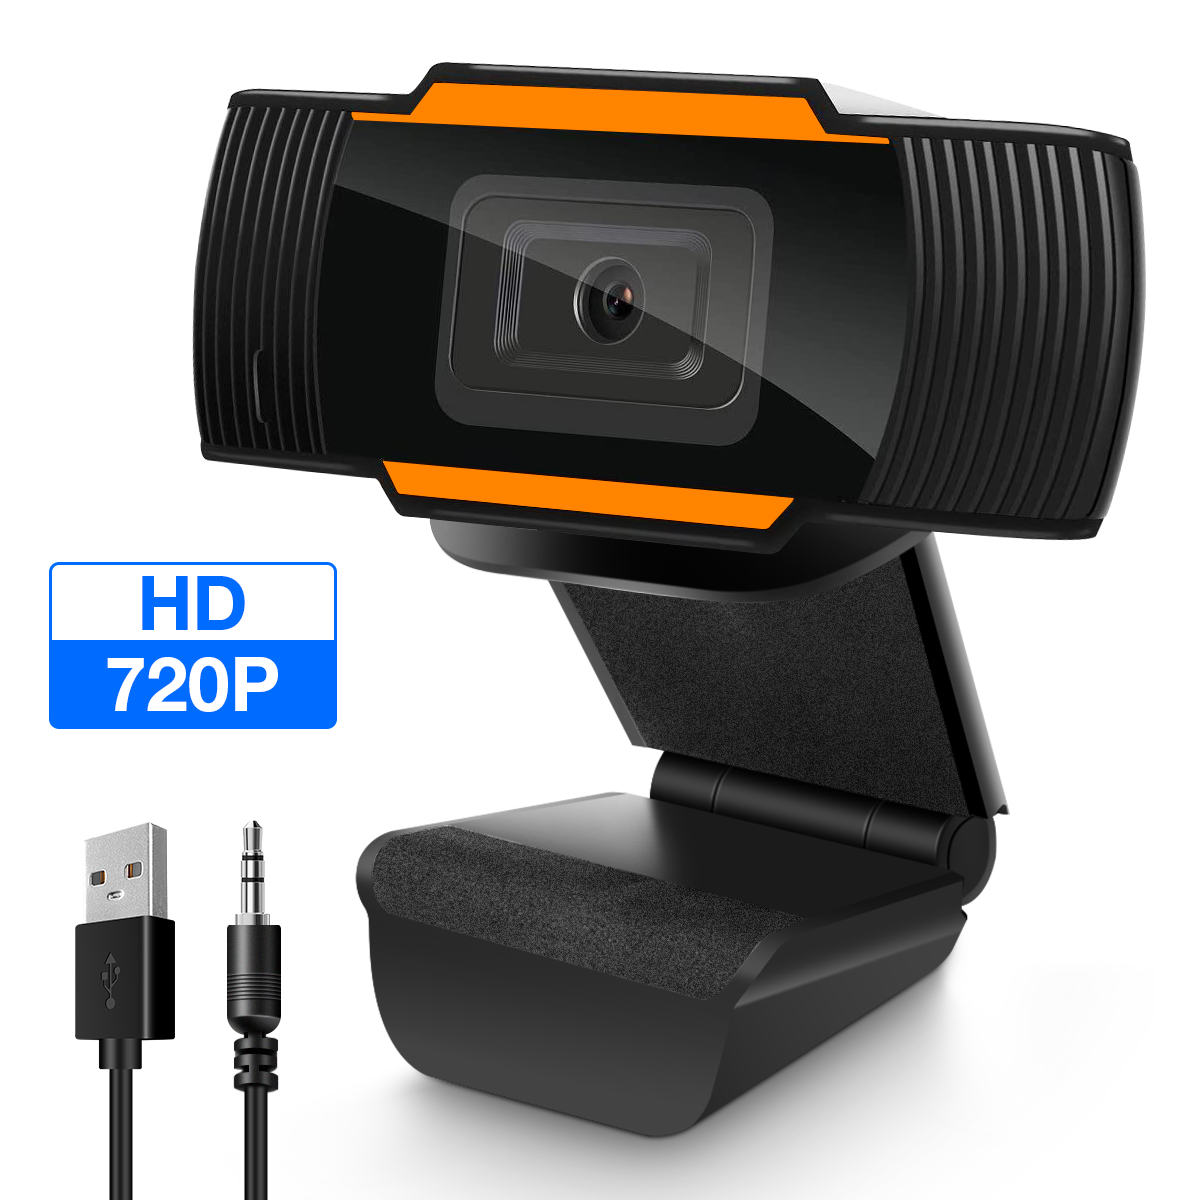 720P-HD-Free-Drive-USB-Webcam-Automatic-Dimming-Conference-Live-Computer-Camera-Built-in-Noise-Reduc-1673830-2